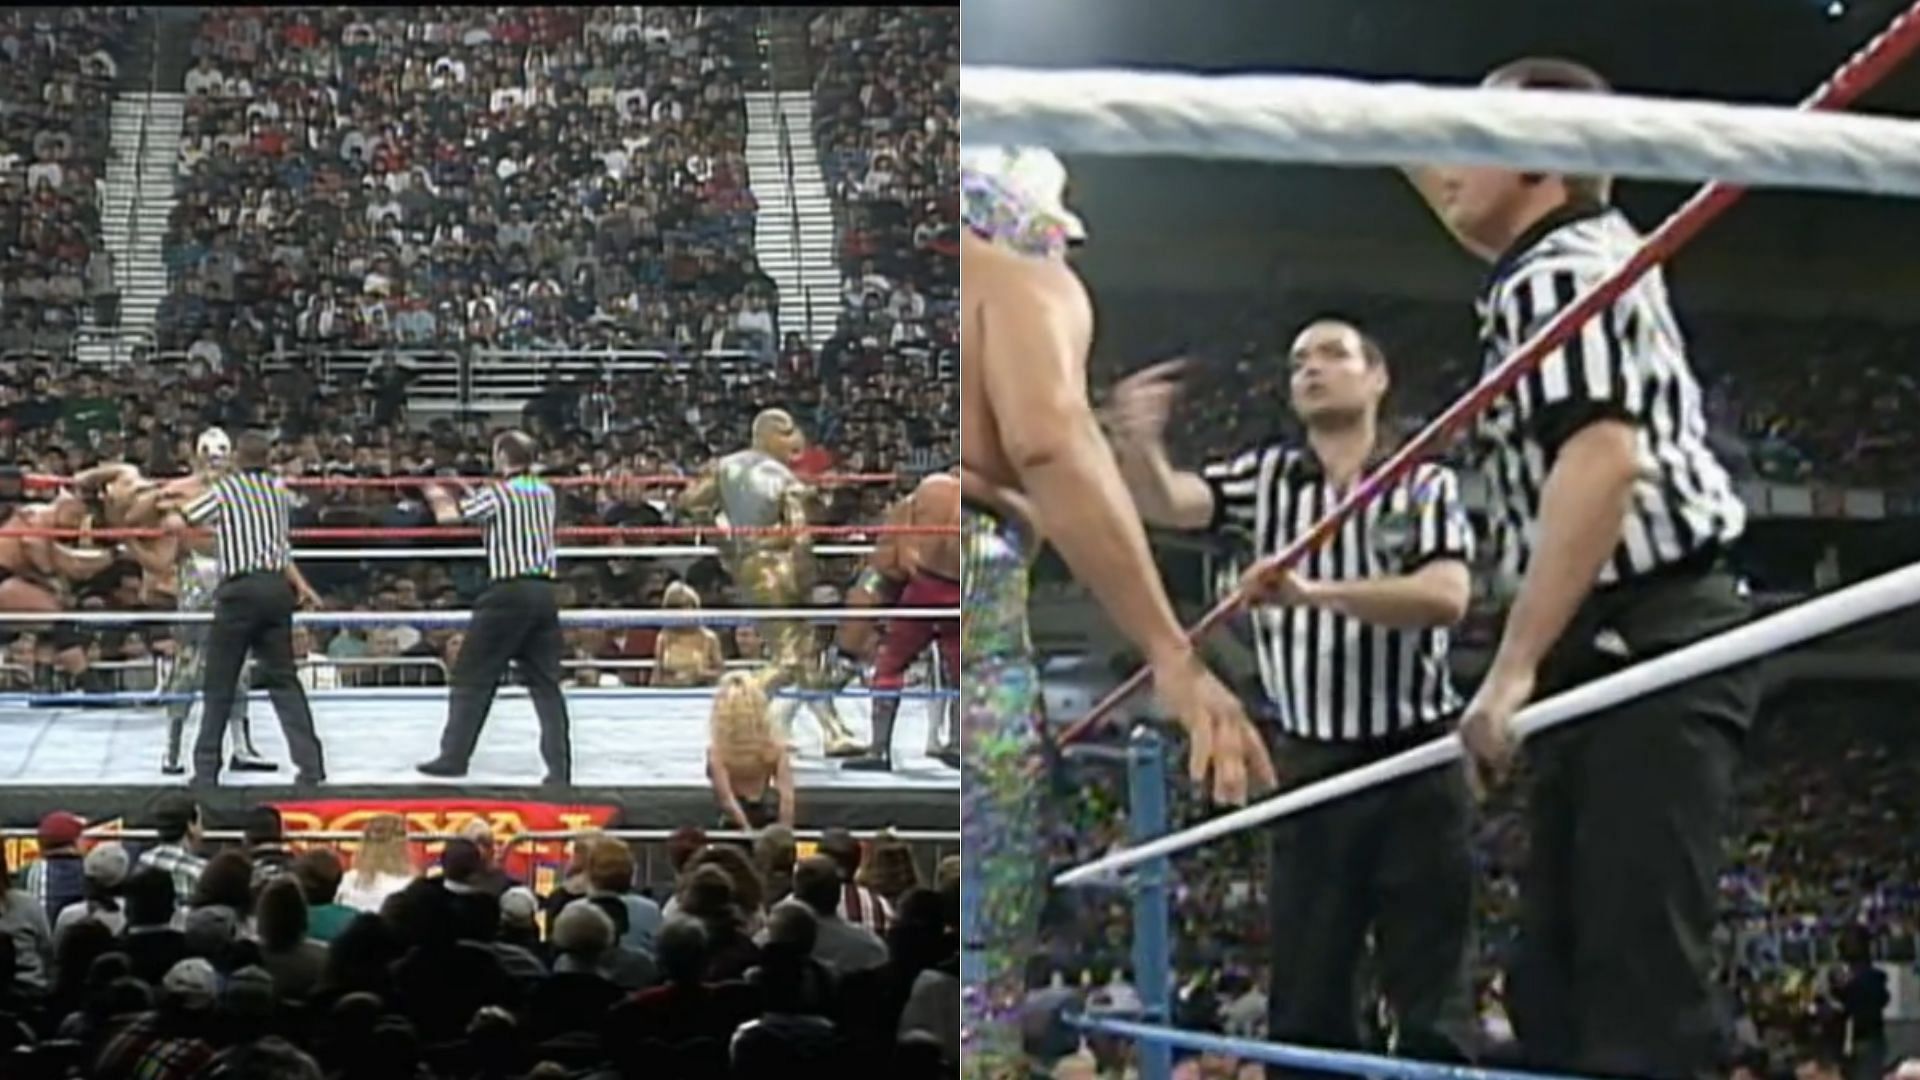 Mil Mascaras appeared in the 1997 Royal Rumble match.